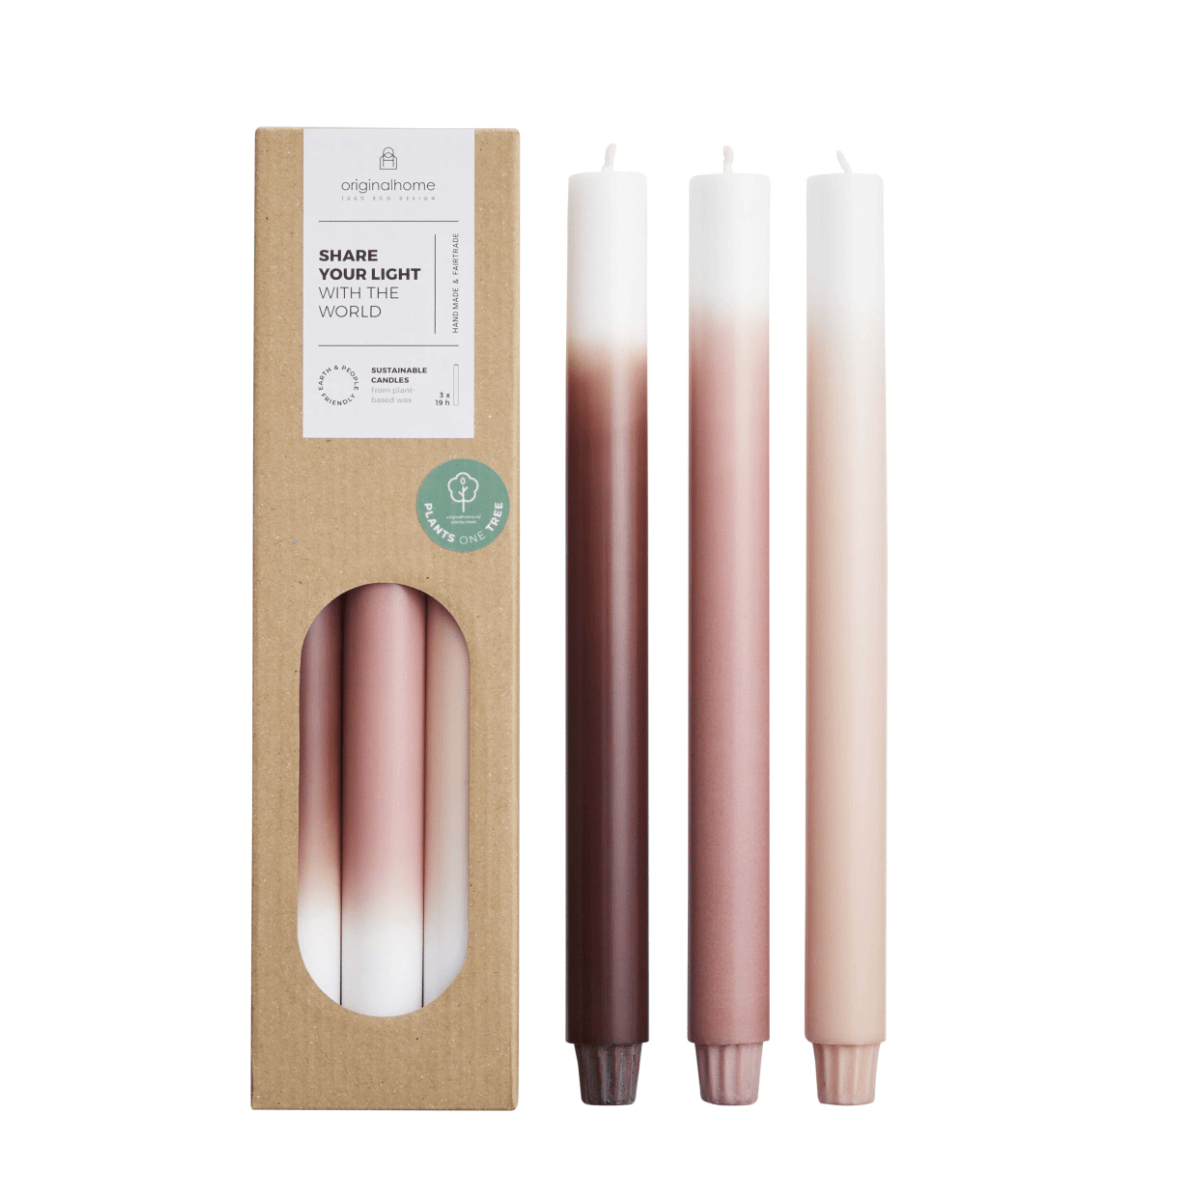 Set of 3 Gradient Candles Dusty Rose, Originalhome - By Native